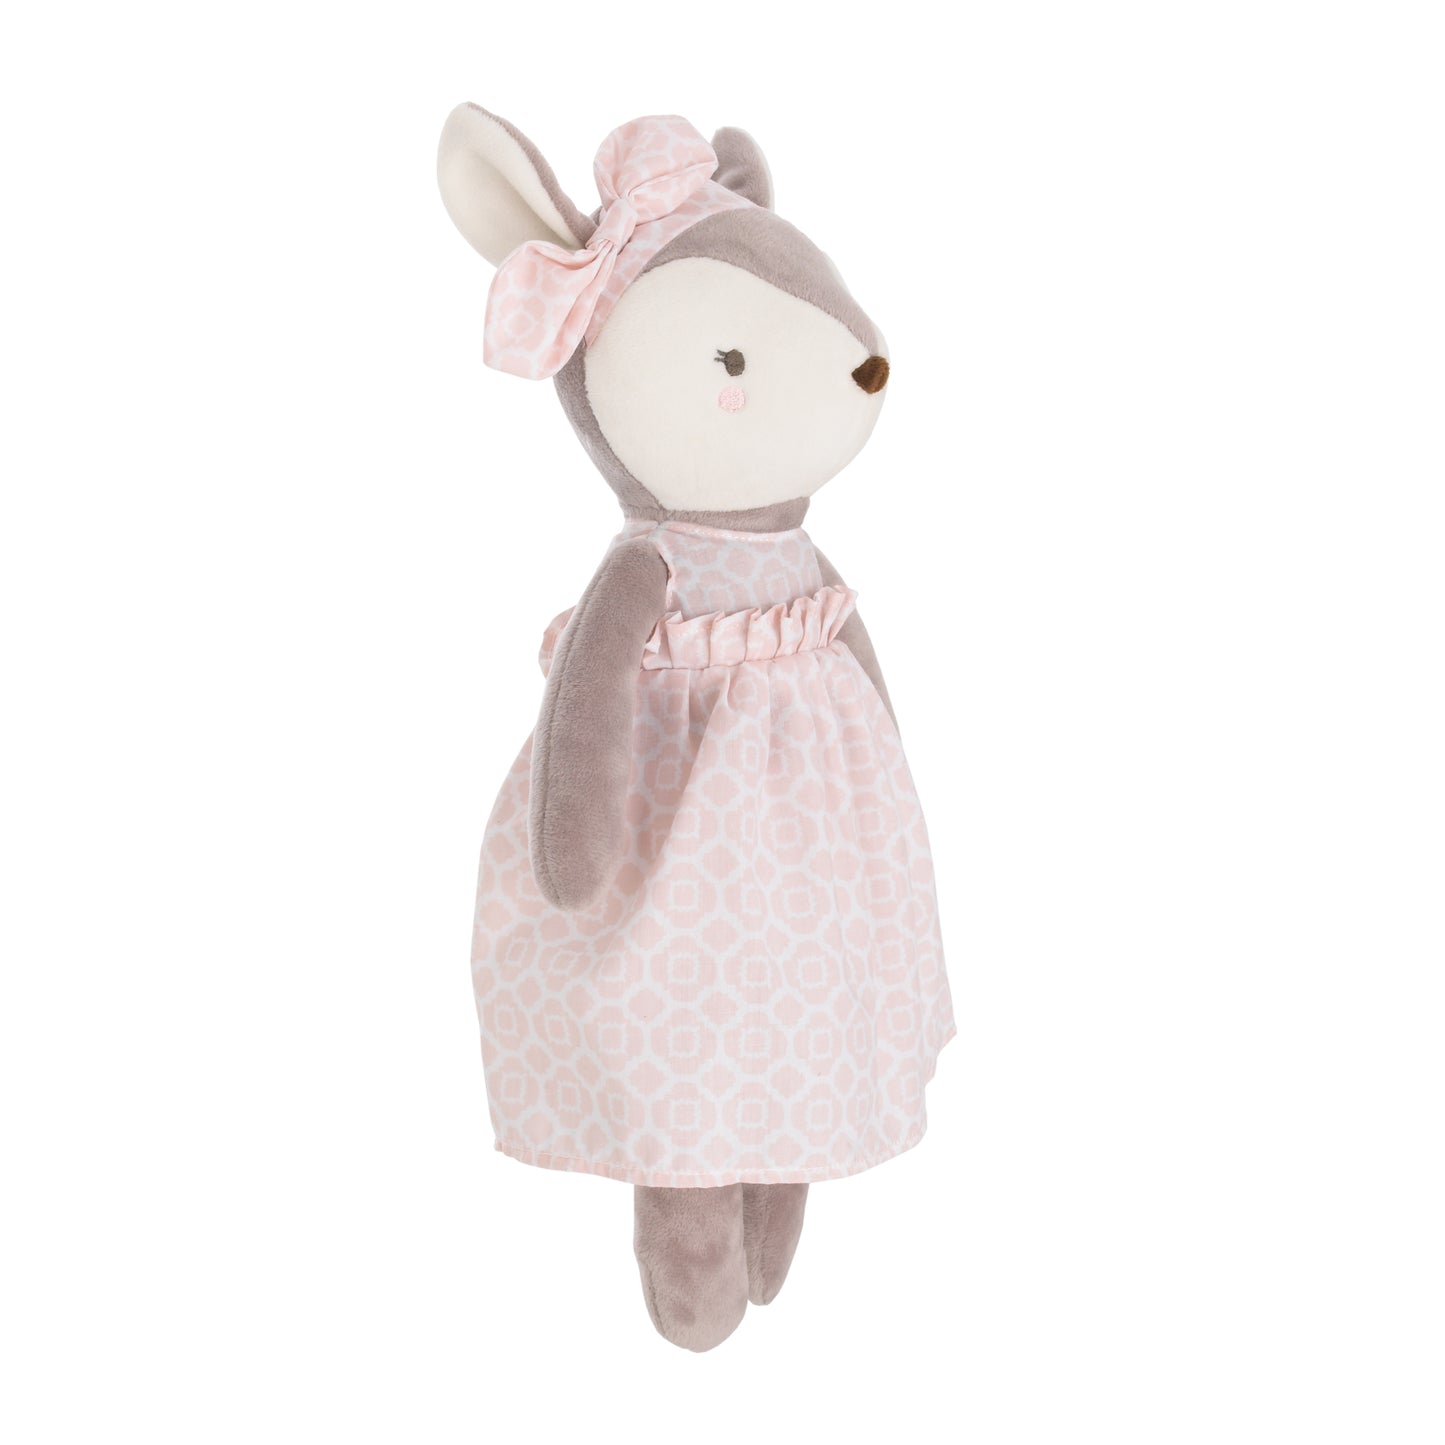 NoJo Countryside Floral - Grey, Ivory and Pink Plush Deer Toy